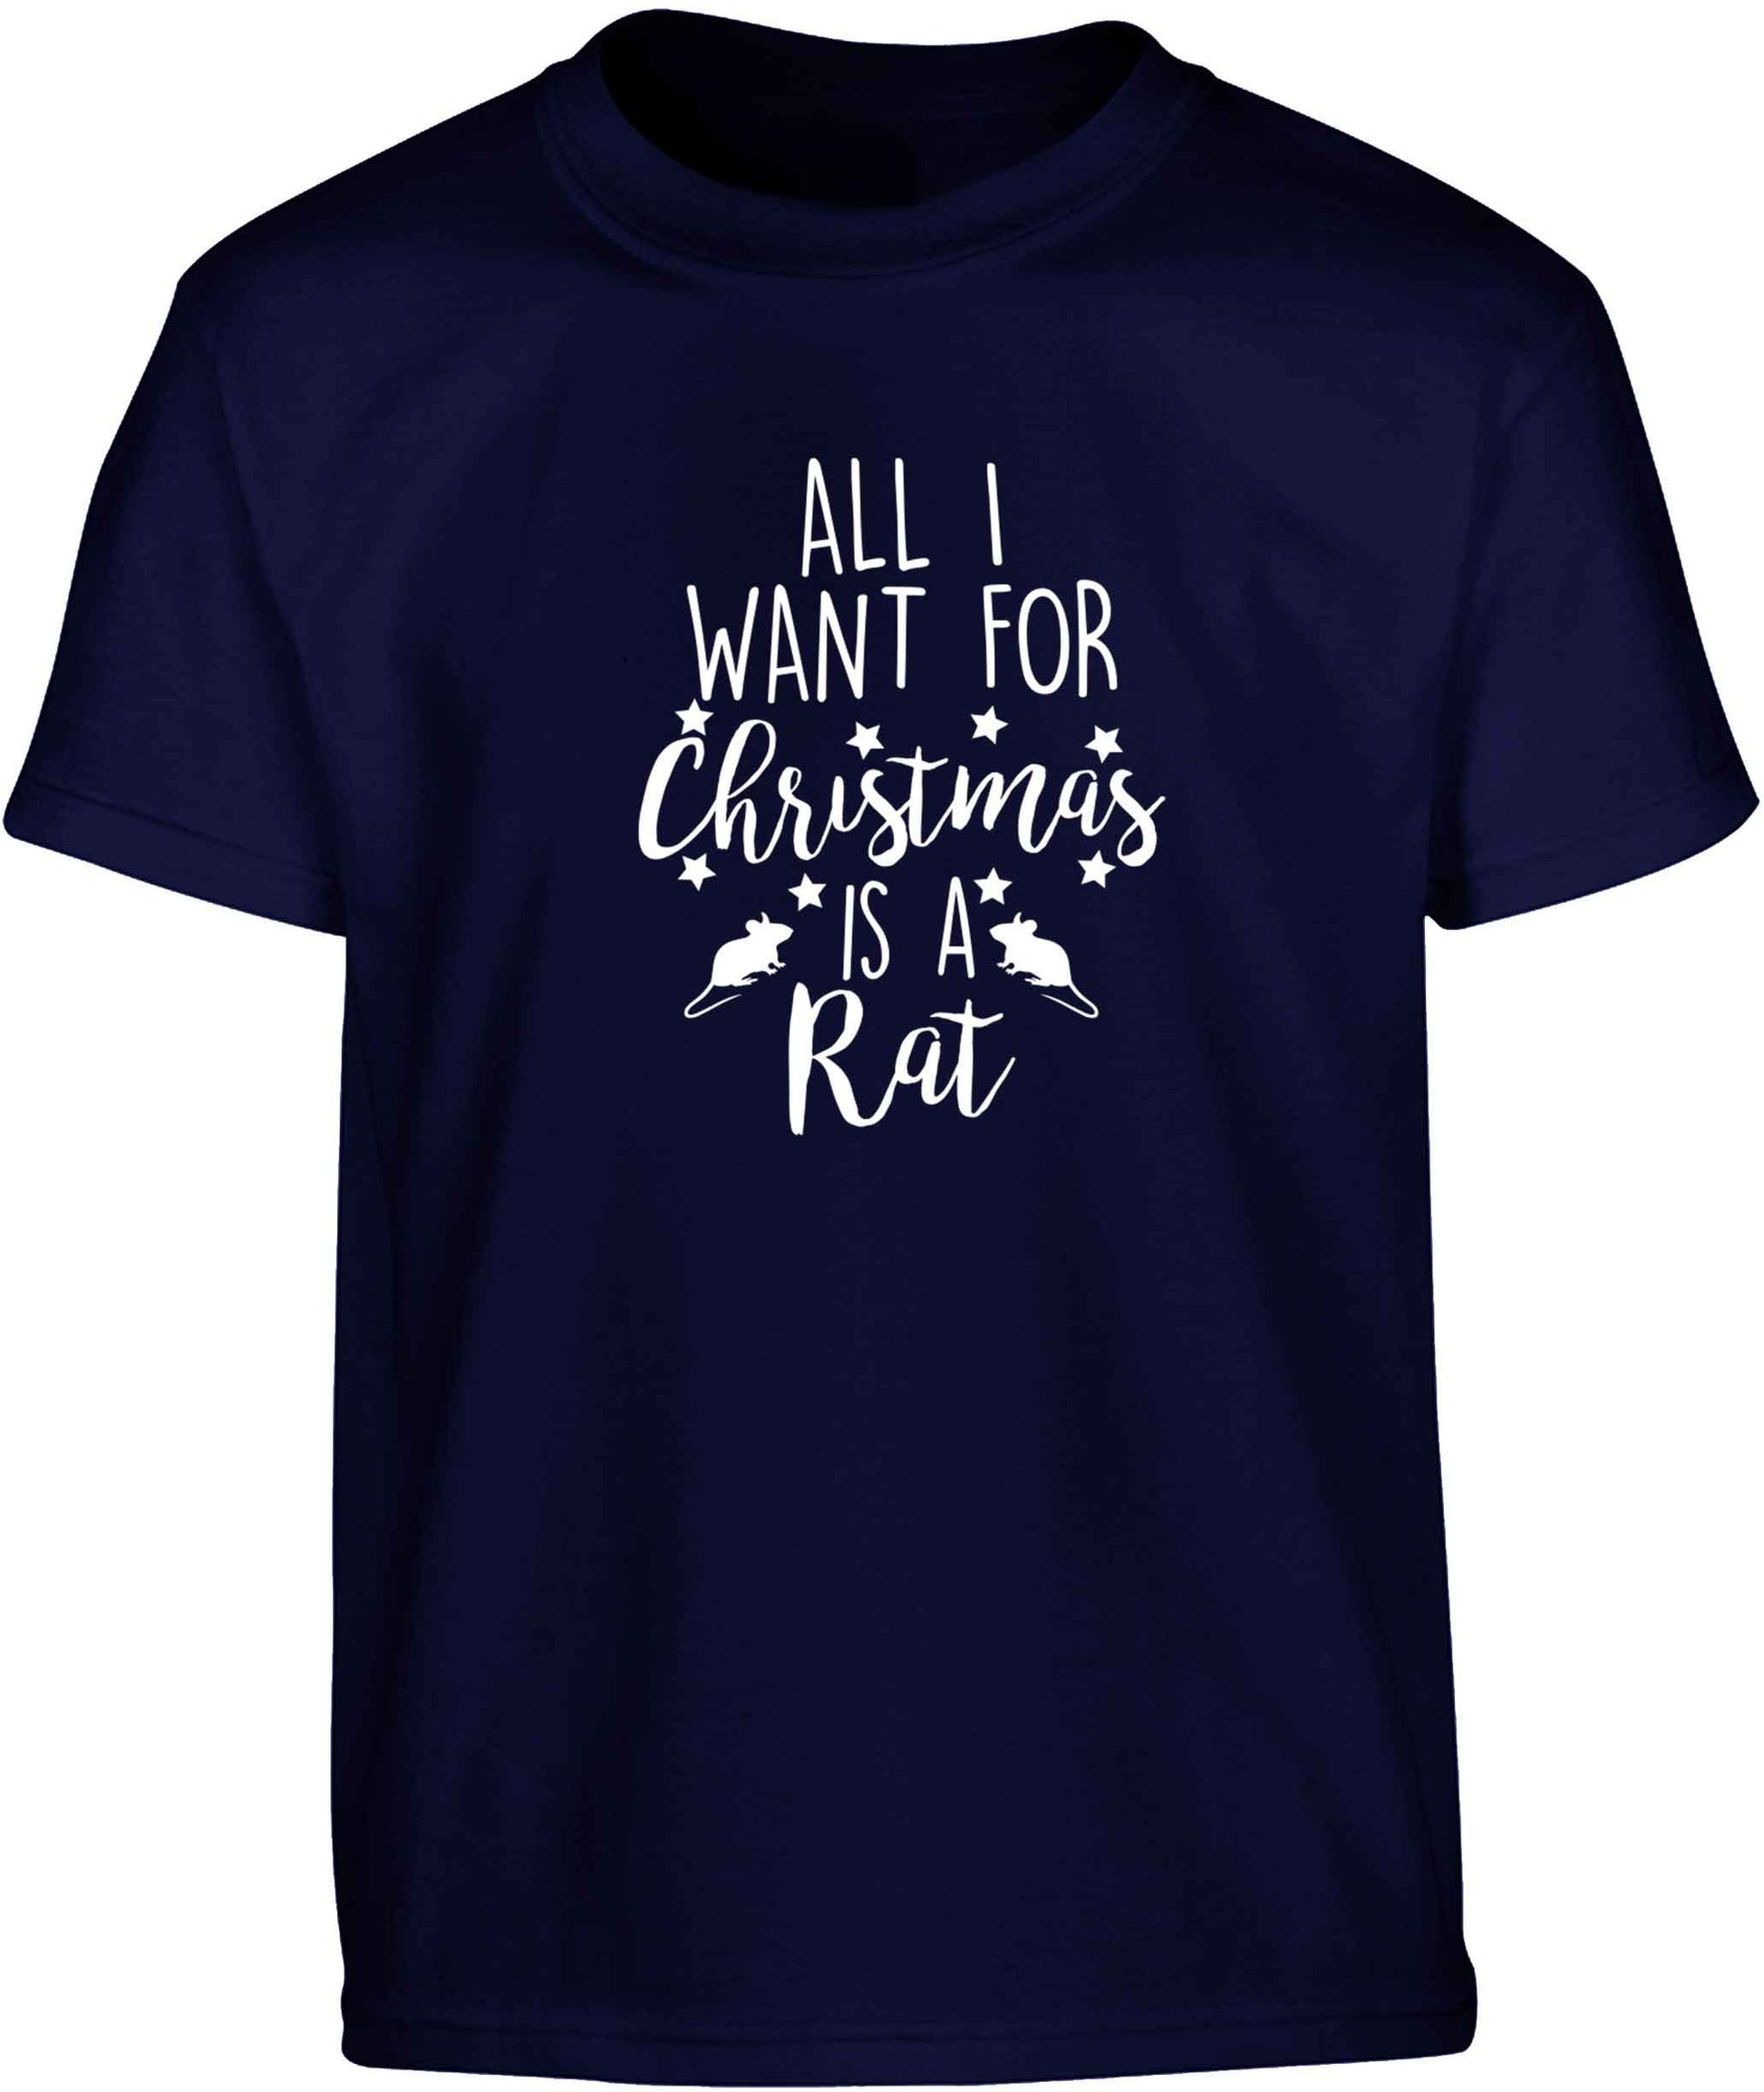 All I want for Christmas is a rat Children's navy Tshirt 12-13 Years